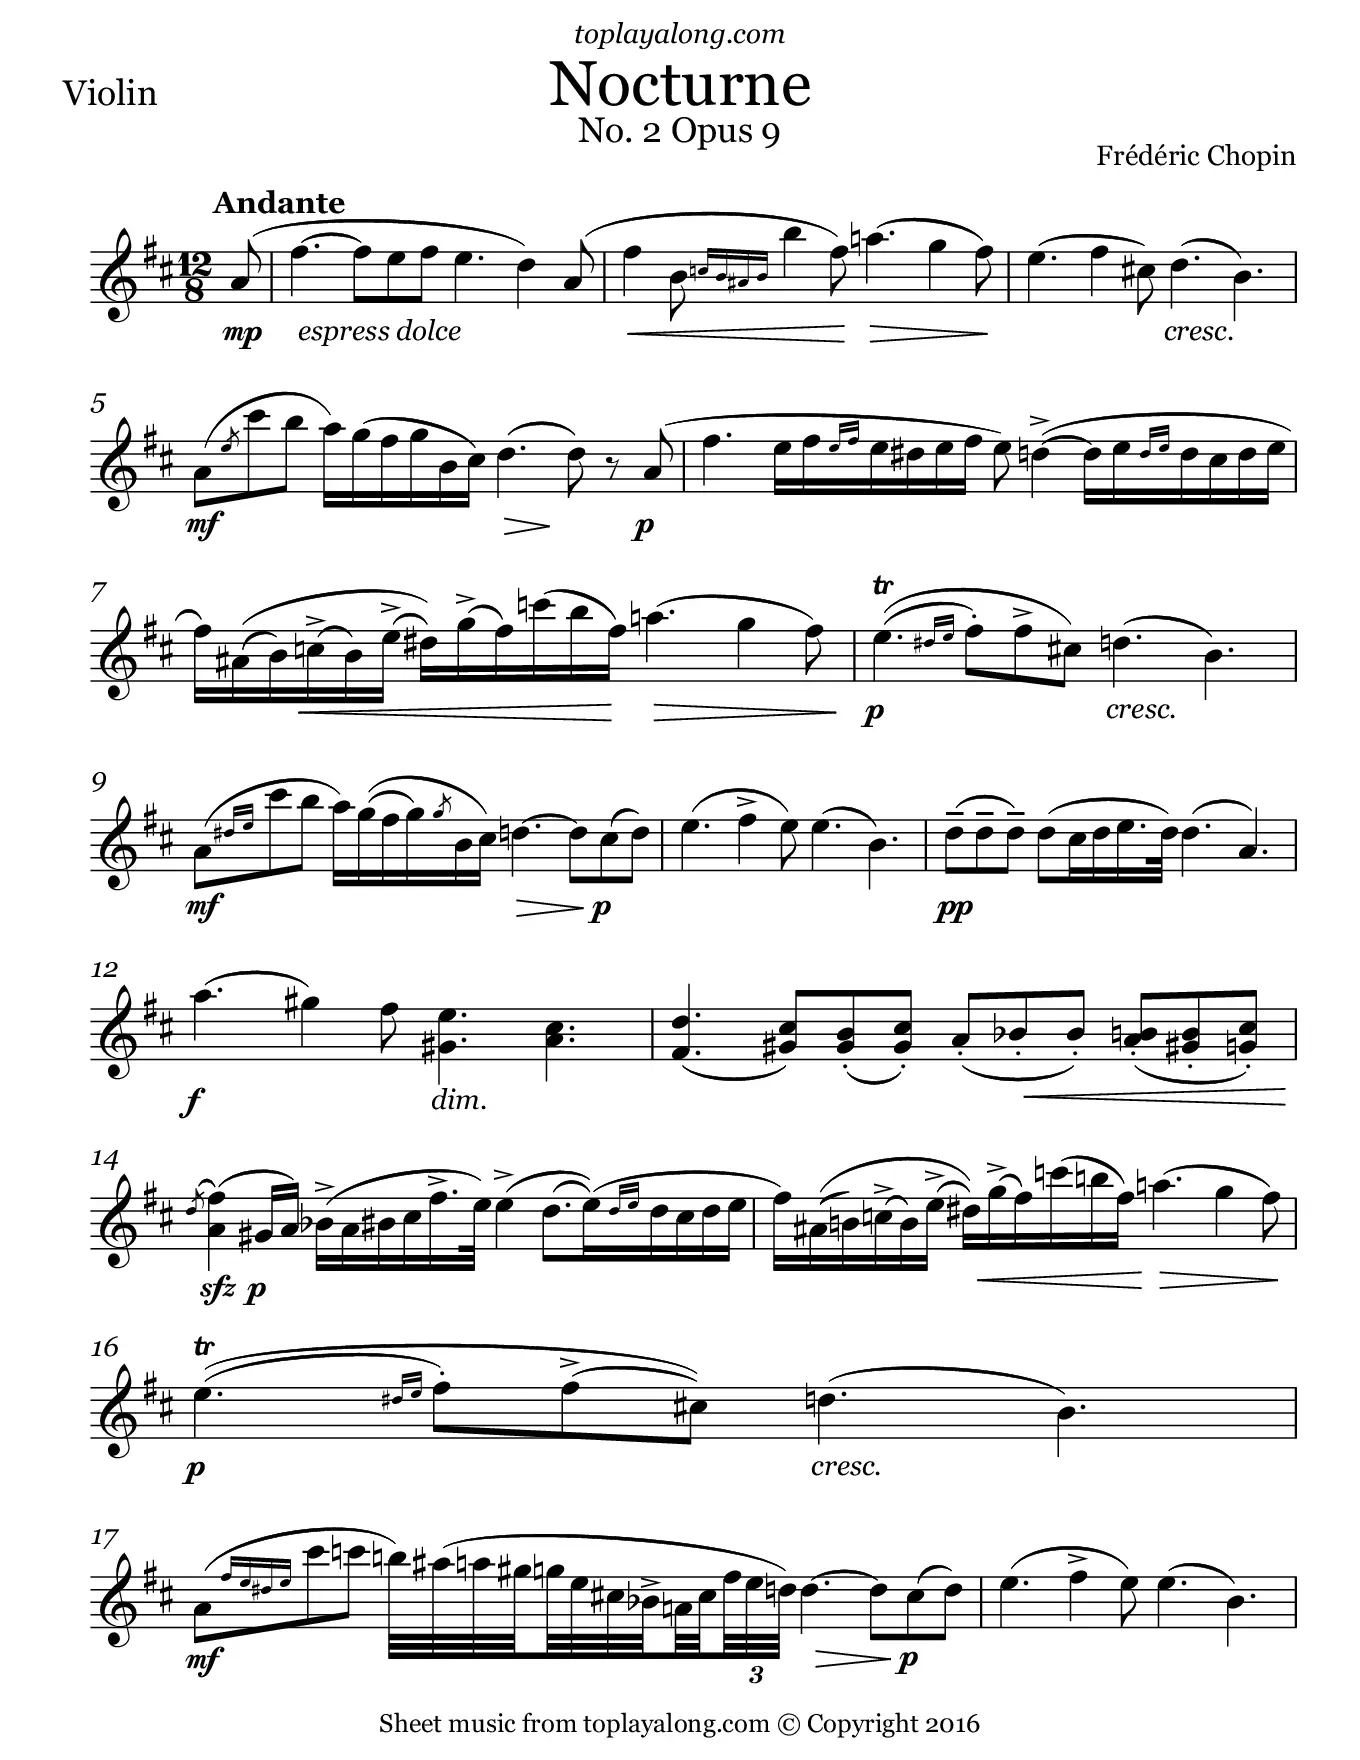 bach nocturne partitura violin - What grade is Nocturne in B flat